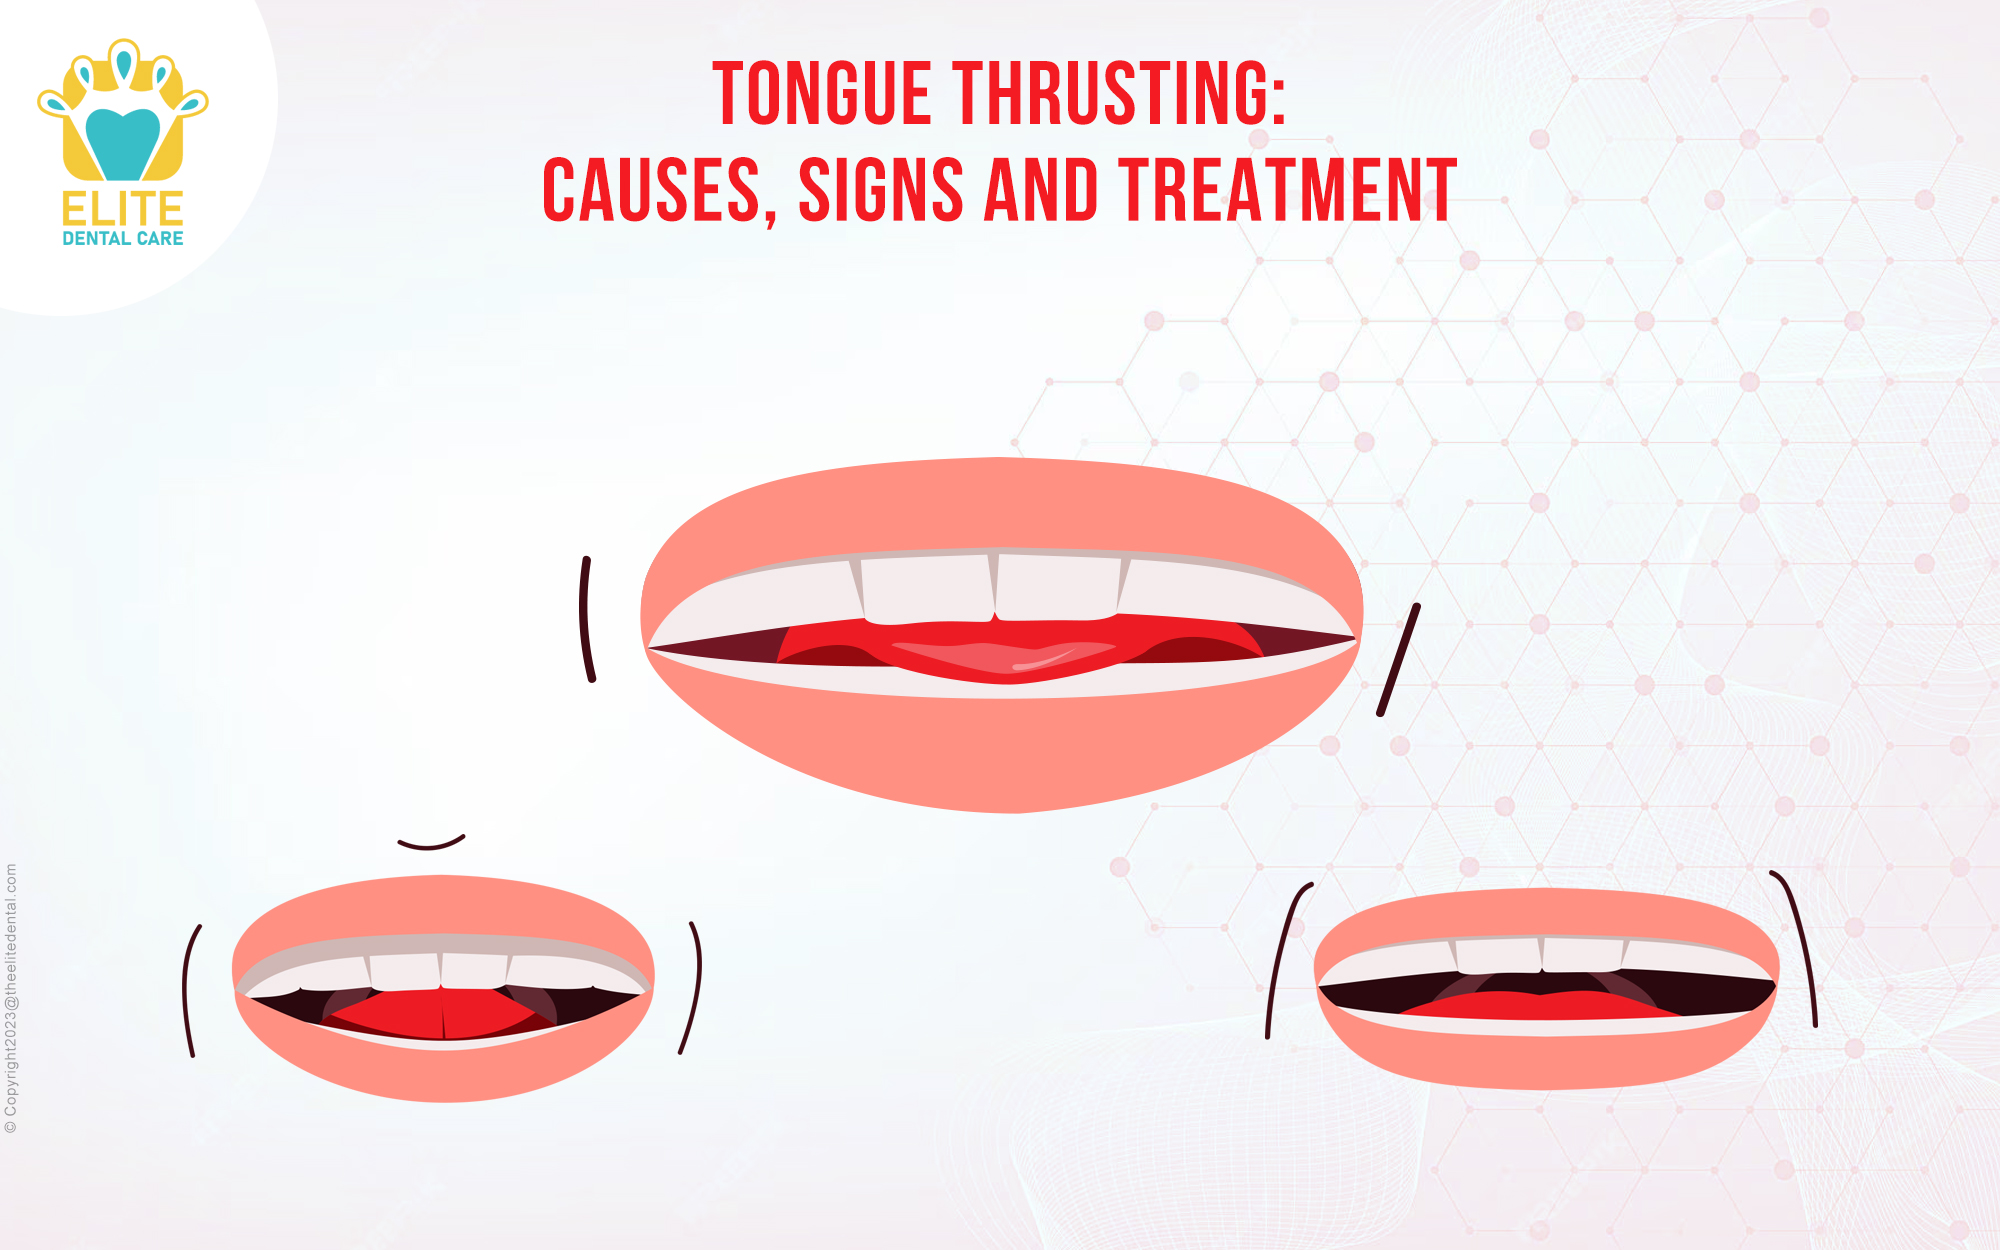 tongue thrusting - causes, signs and treatment